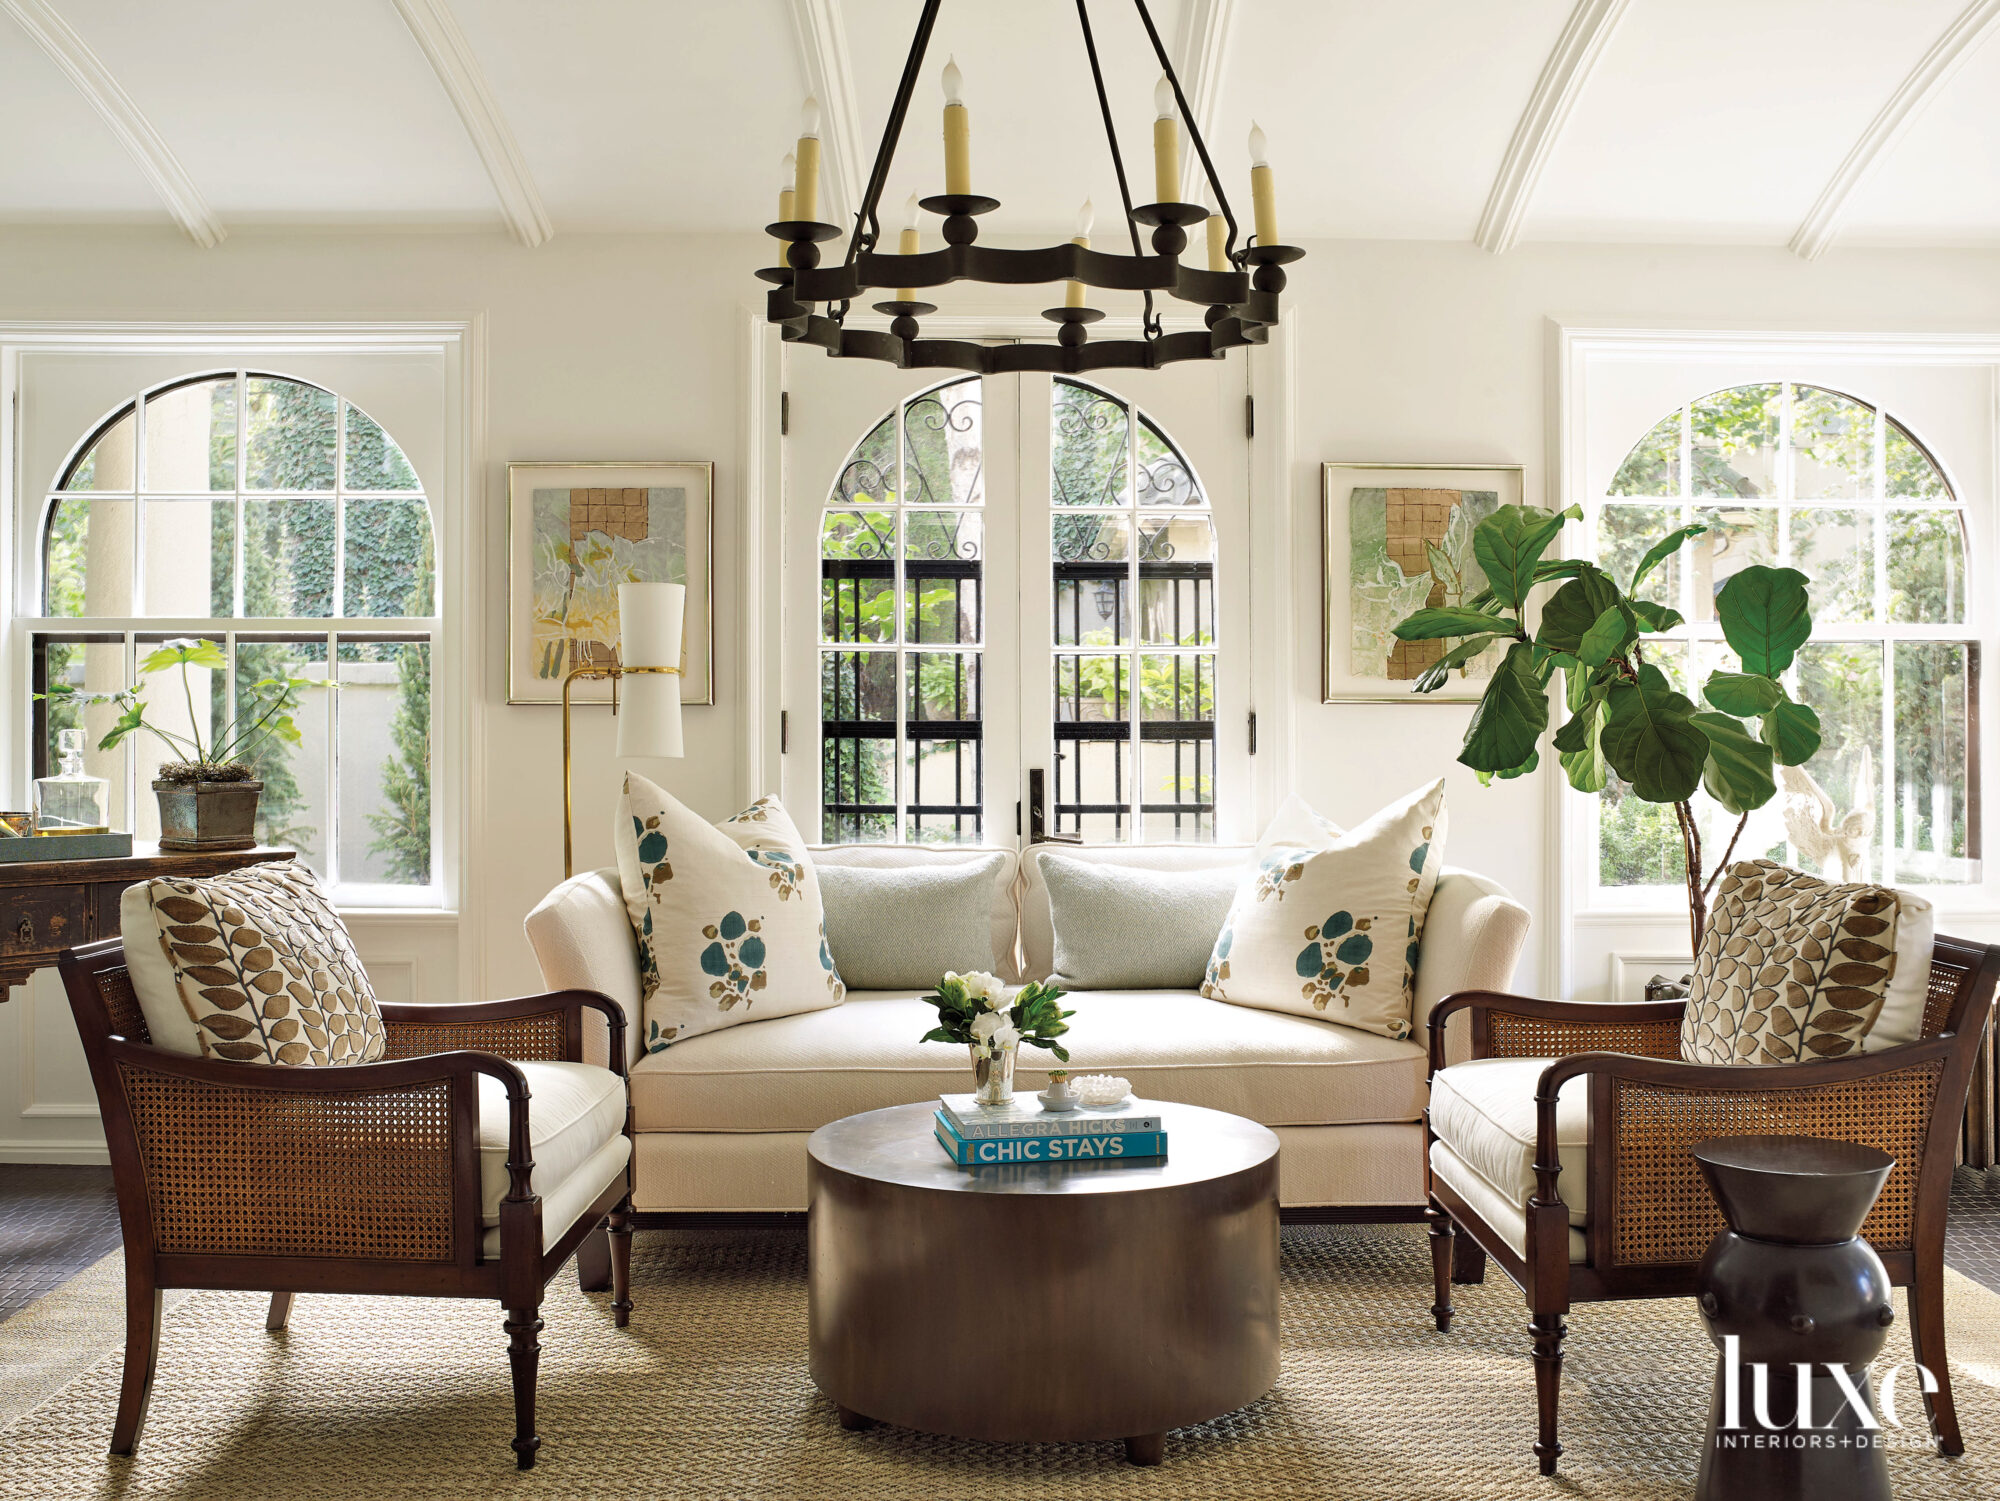 A sunroom has large arched windows and comfortable furniture.